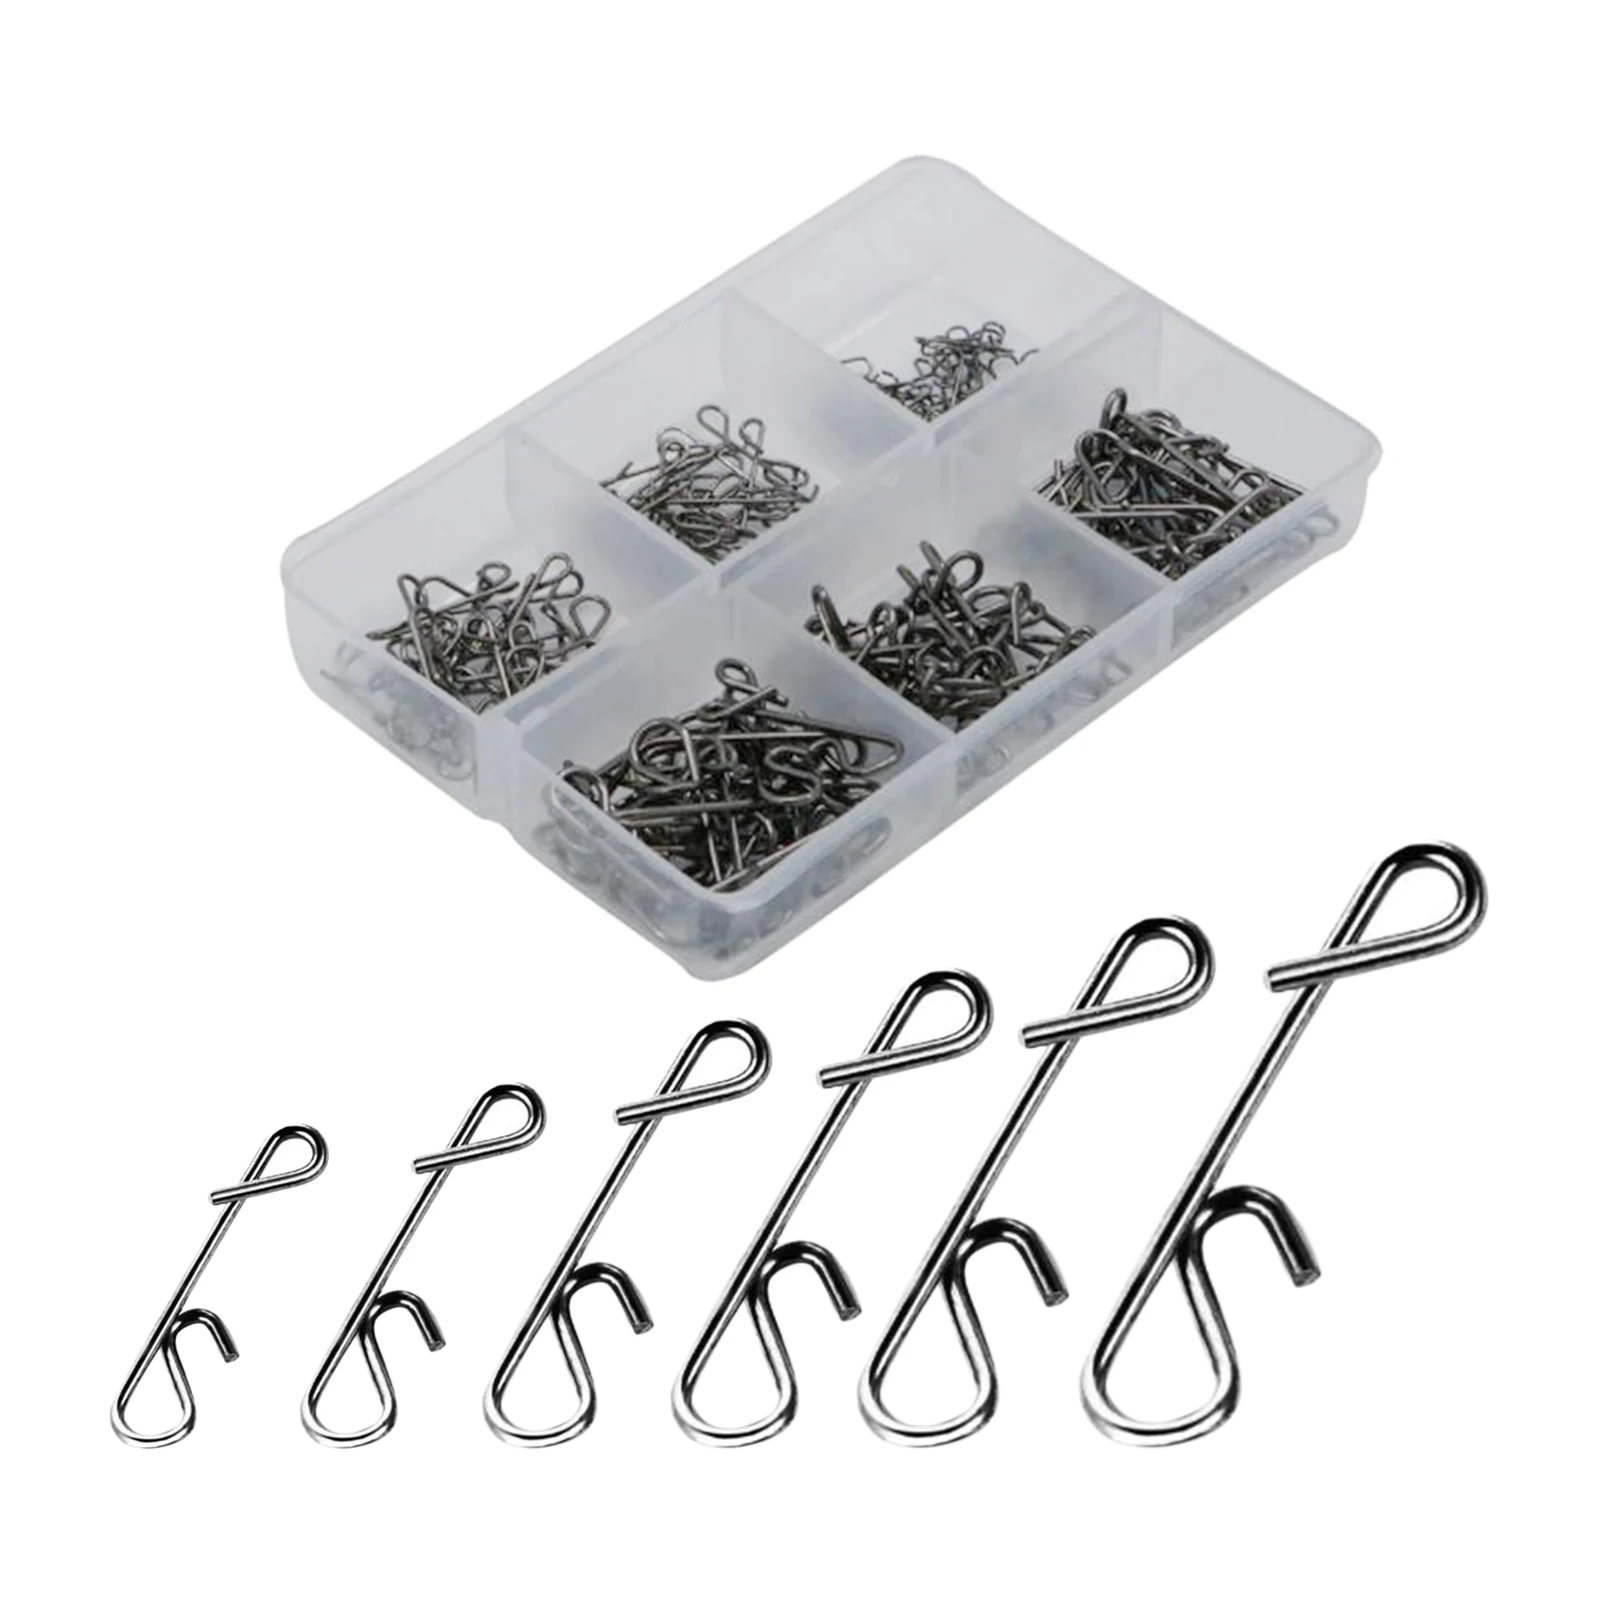 150 pieces Longline Fishing Clips Long Line Wire Swivels Connector Snaps Hangers Accessories Tackle